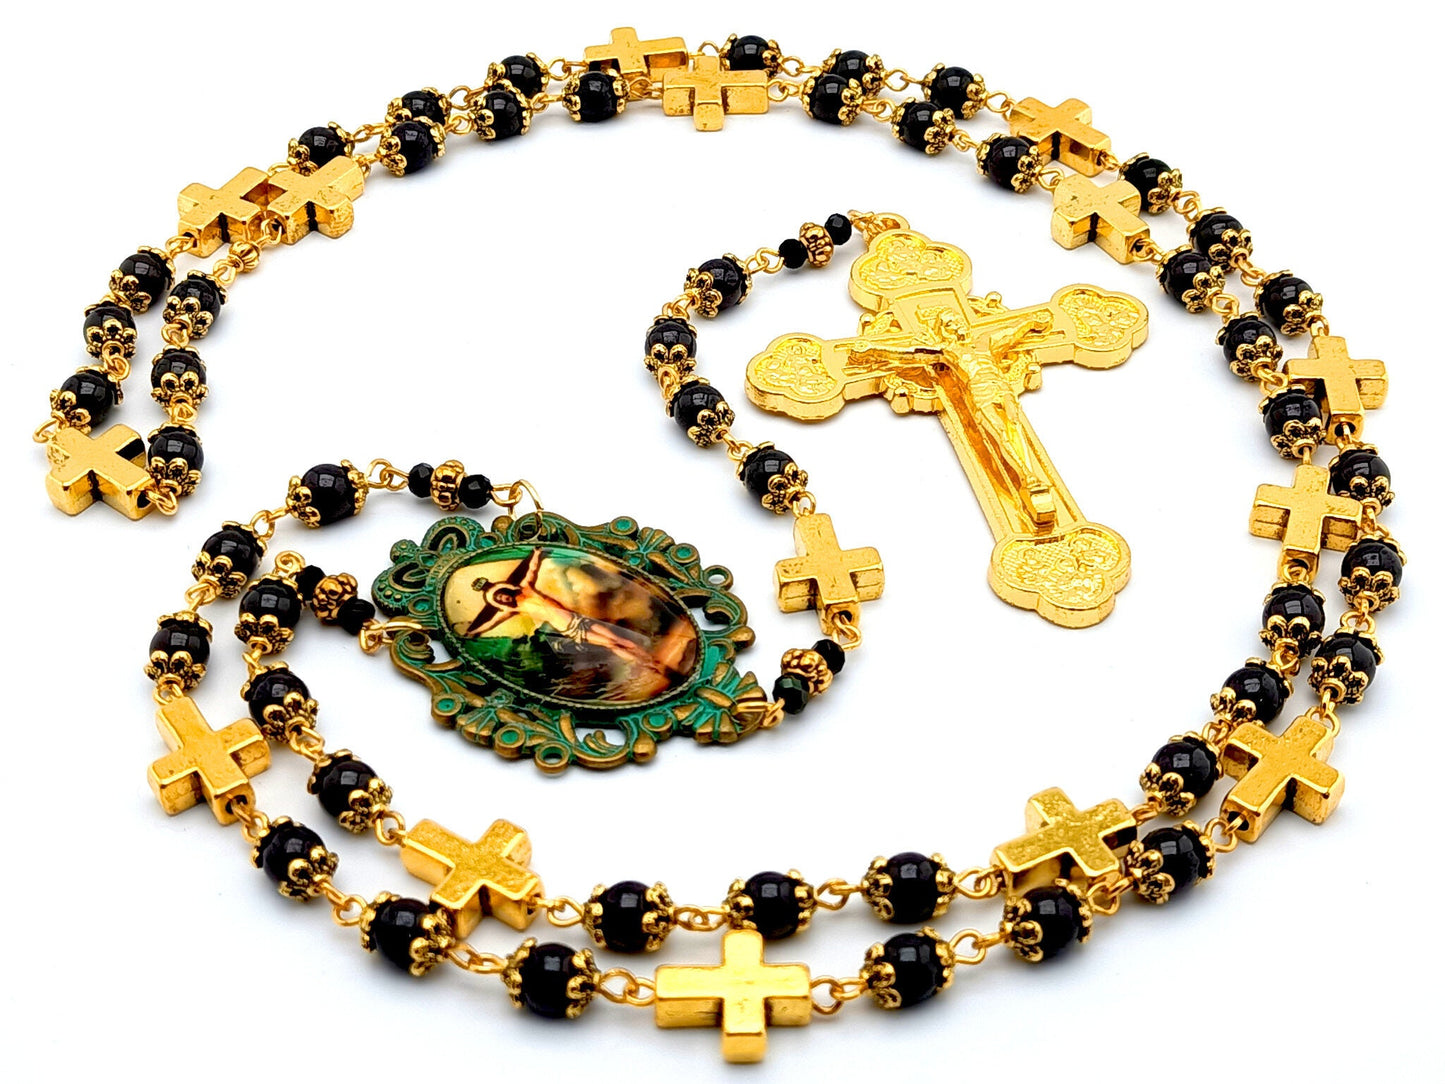 Stations of the Cross unique rosary beads prayer chaplet with garnet and gold cross gemstone beads, golden crucifix and verdi gris picture centre medal.